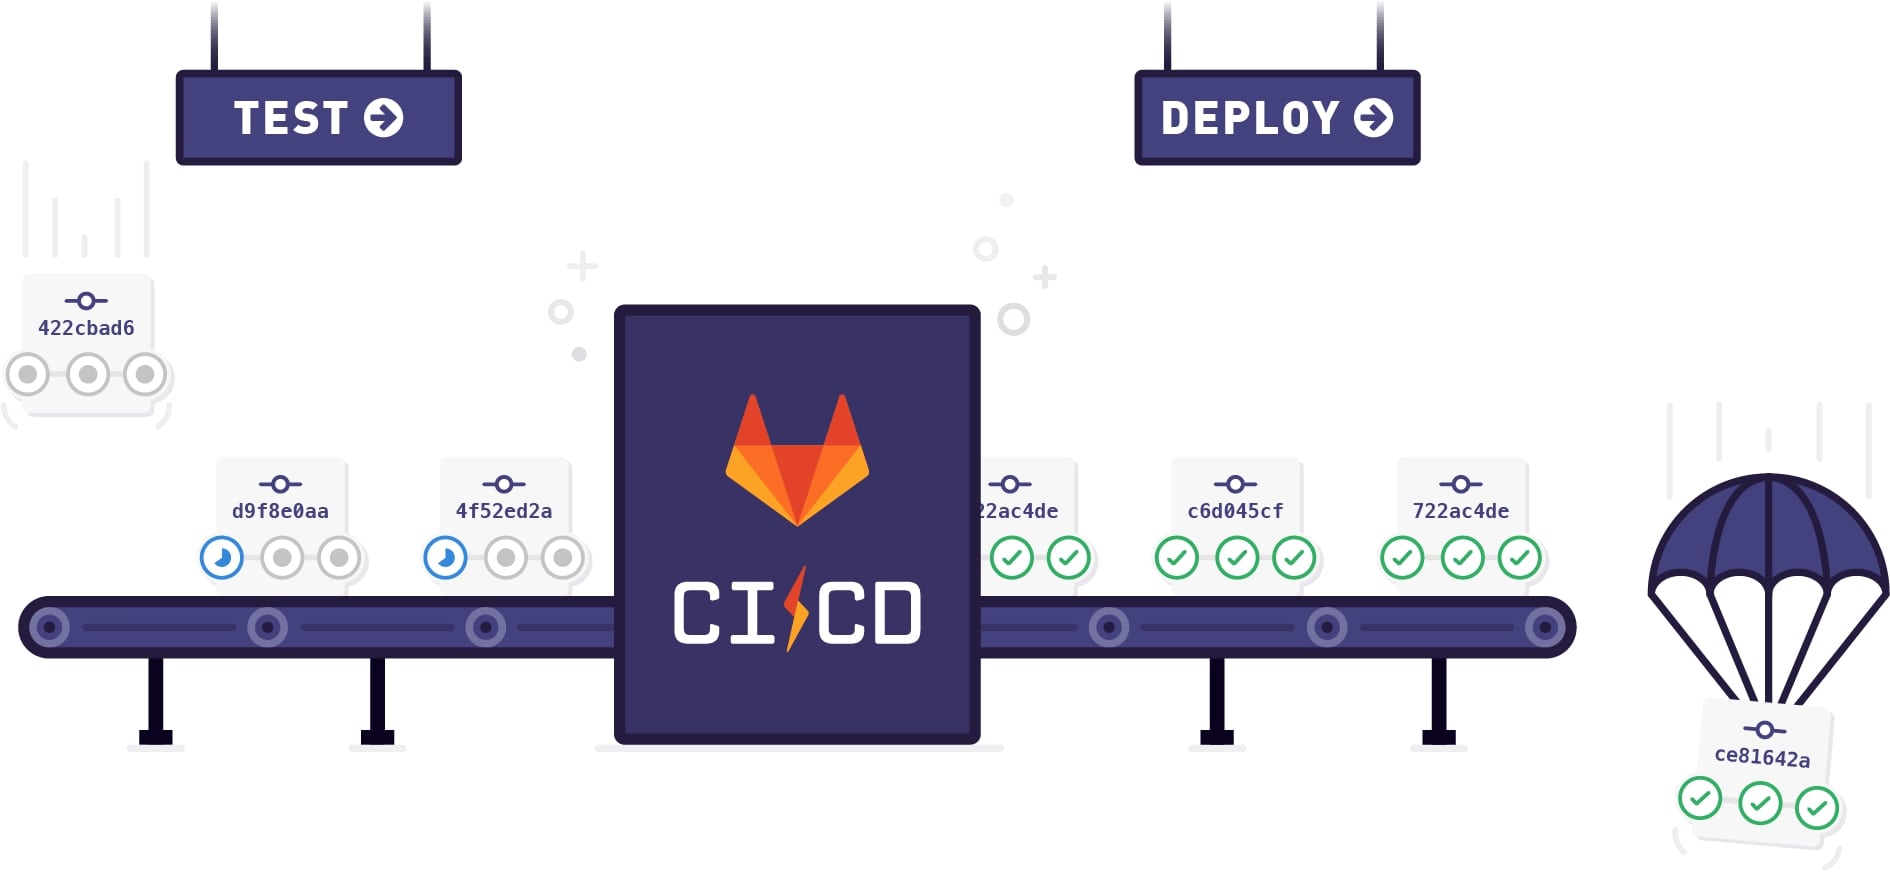 Step by step to deploy code to the server with CI/CD on Gitlab